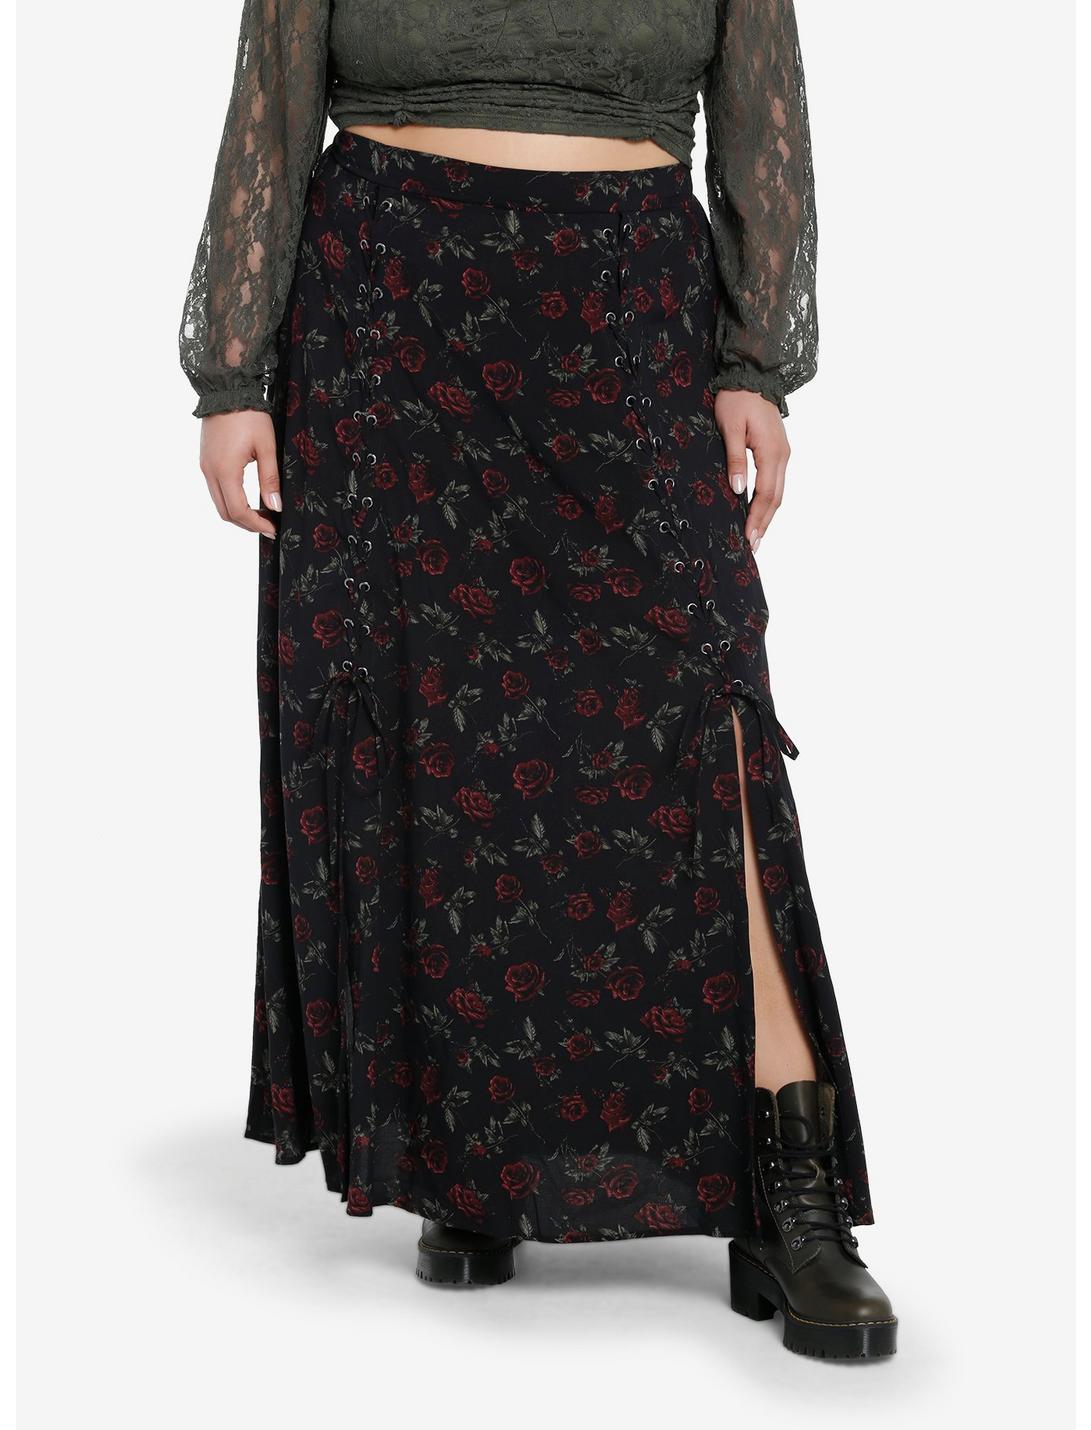 Thorn & Fable Dark Red Rose Lace-Up Maxi Skirt Plus Size, RED, hi-res